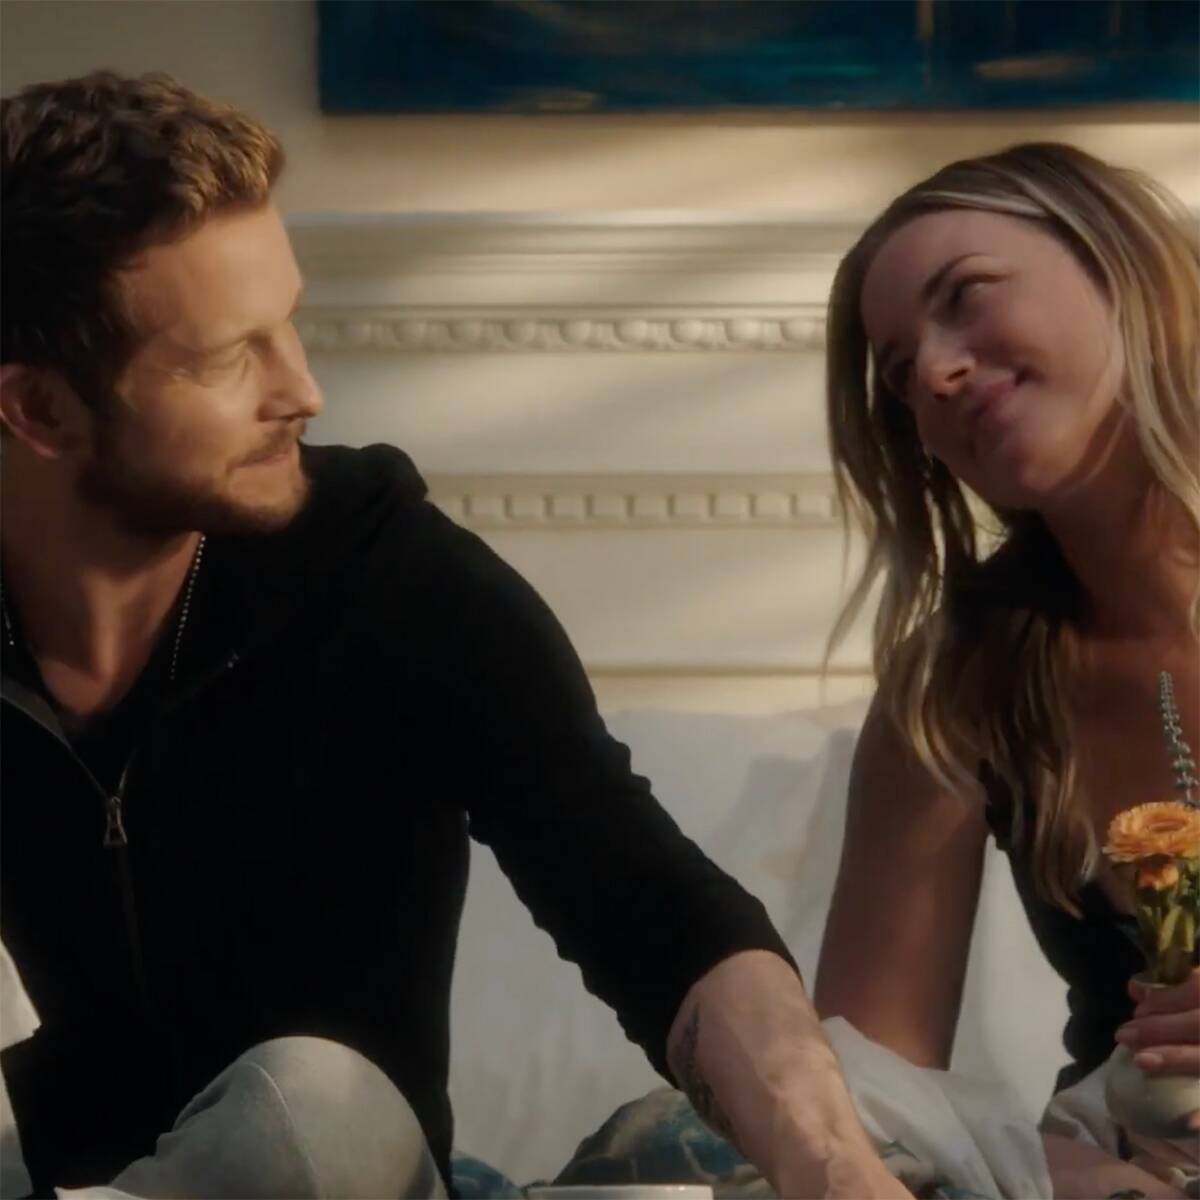 Watch Conrad Bring Nic Breakfast in Bed in Cutest The Resident Clip Ever